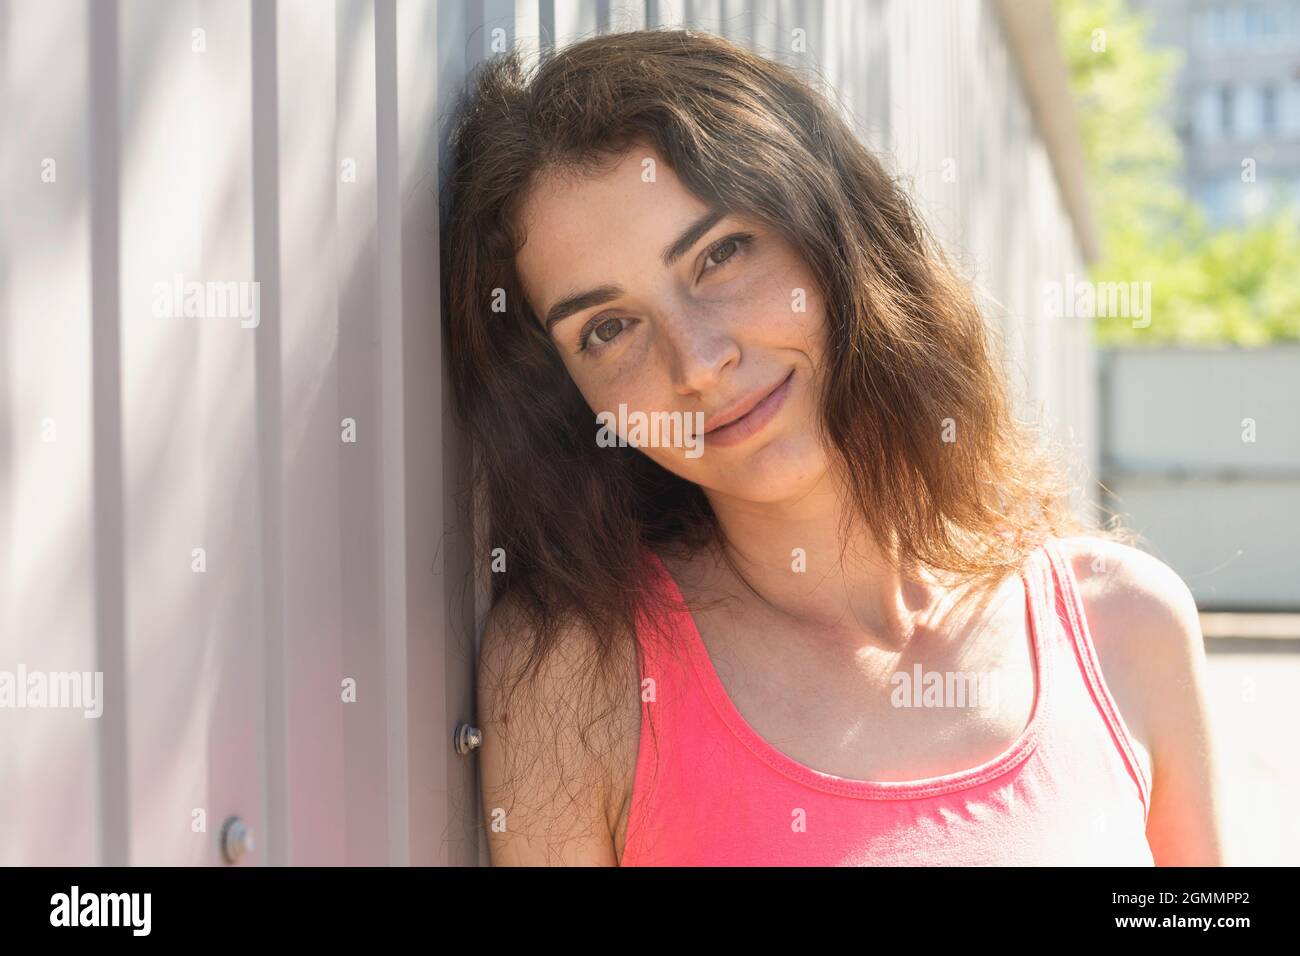 Portrait beautiful smiling young woman leaning against wall Stock Photo